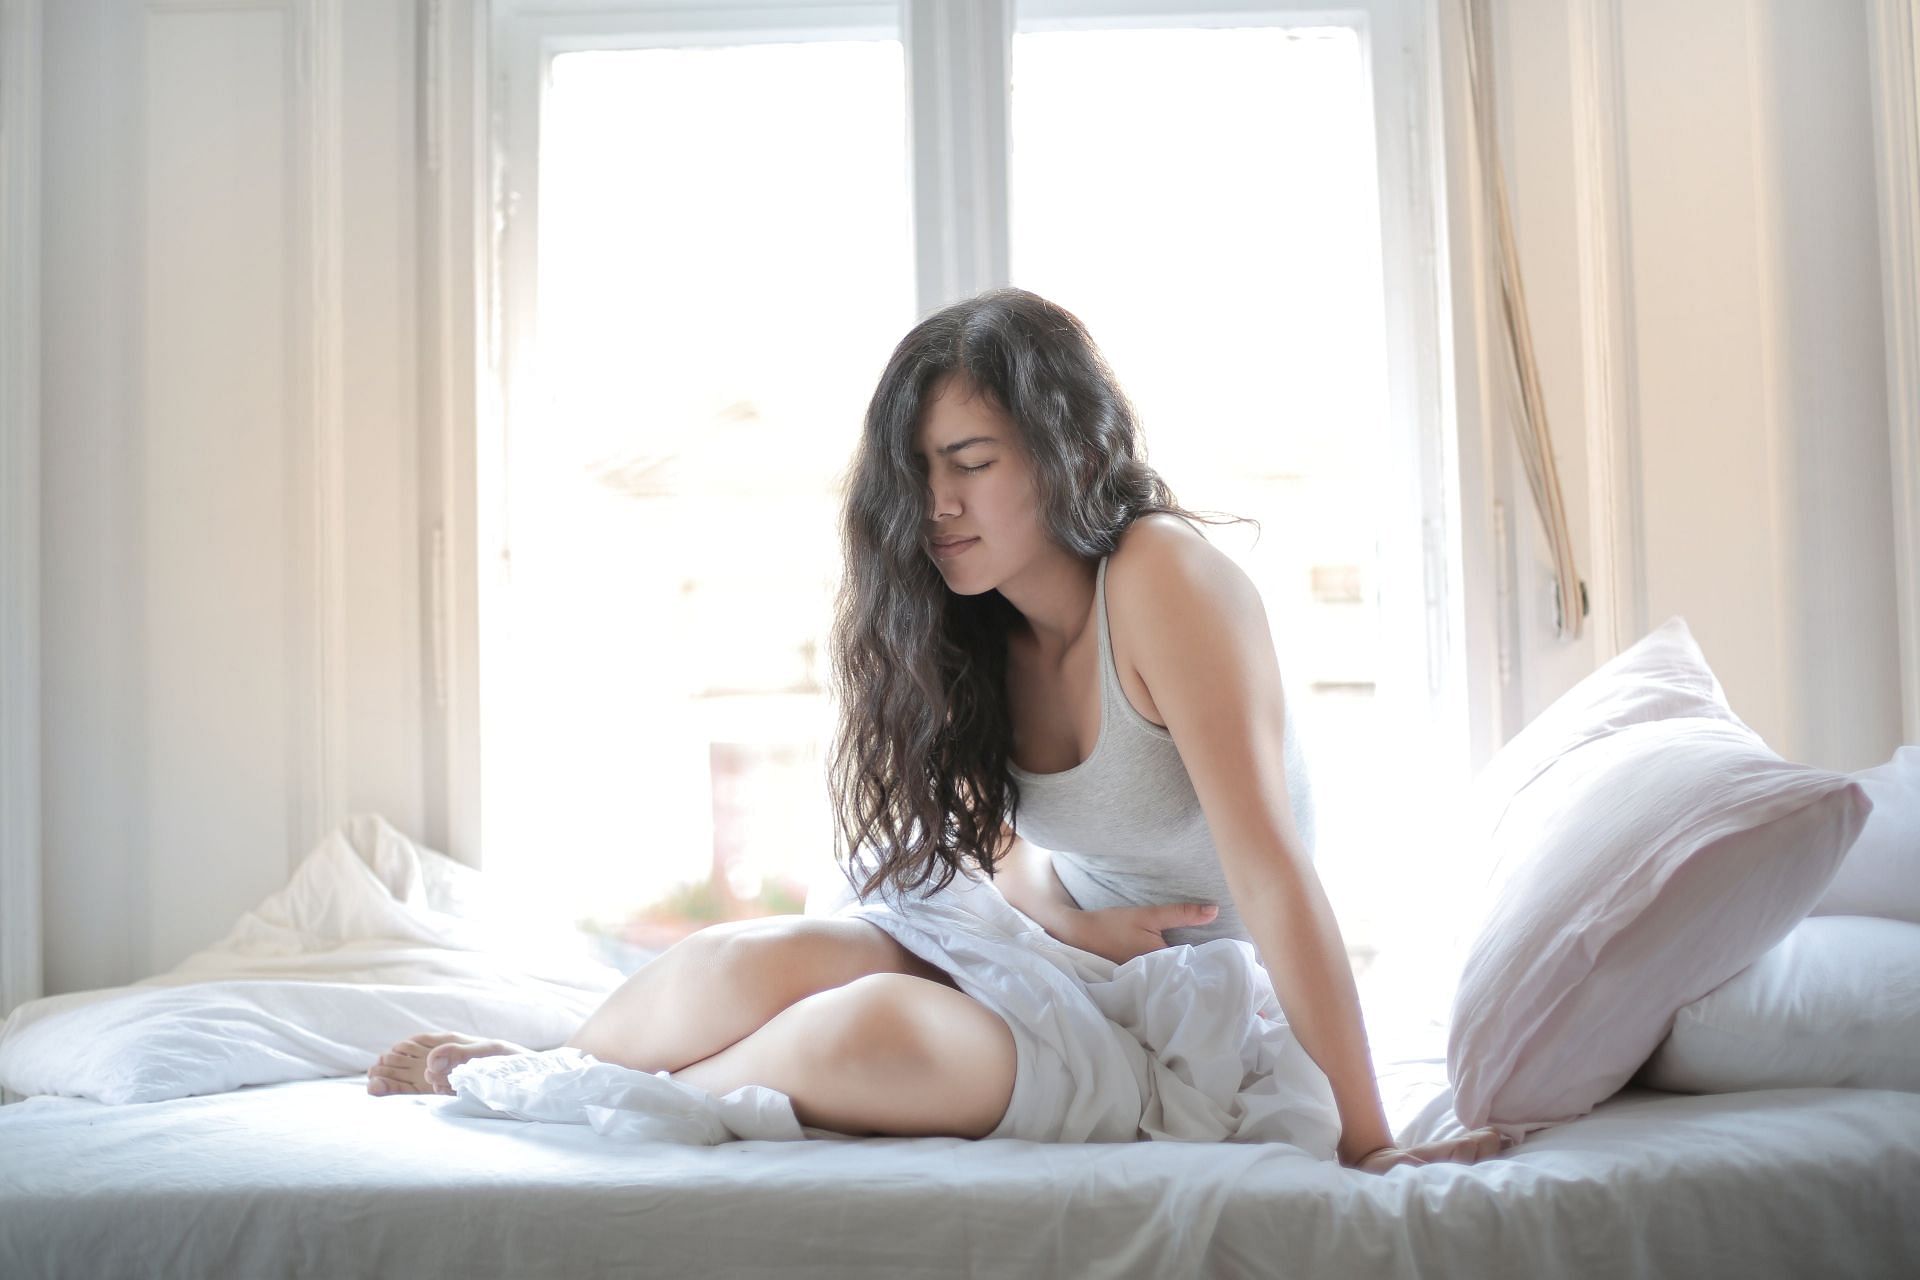 Importance of home remedies for menstrual cramps (image sourced via Pexels / Photo by andrea)